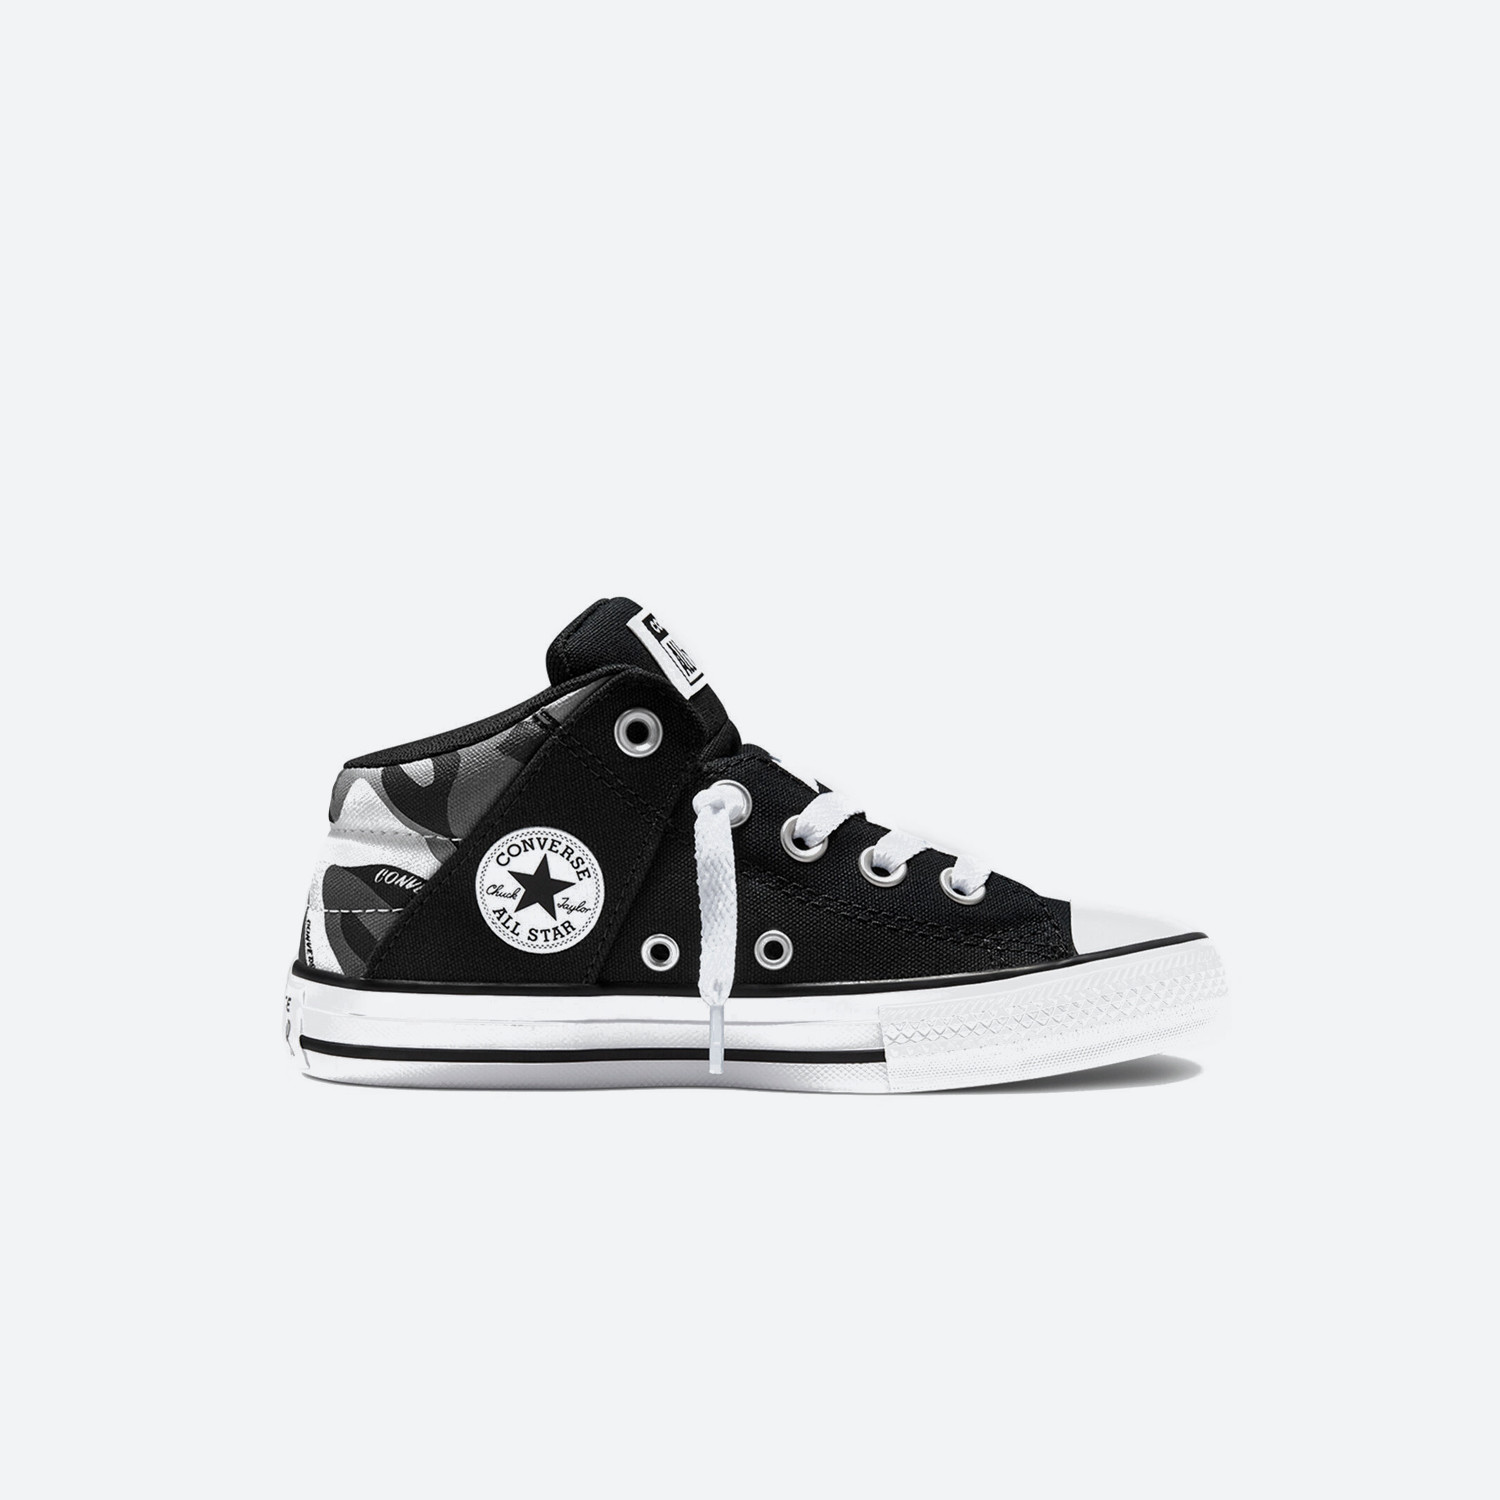 Converse Chuck Taylor All Star Axel Παιδικά Παπούτσια (9000085977_54809)